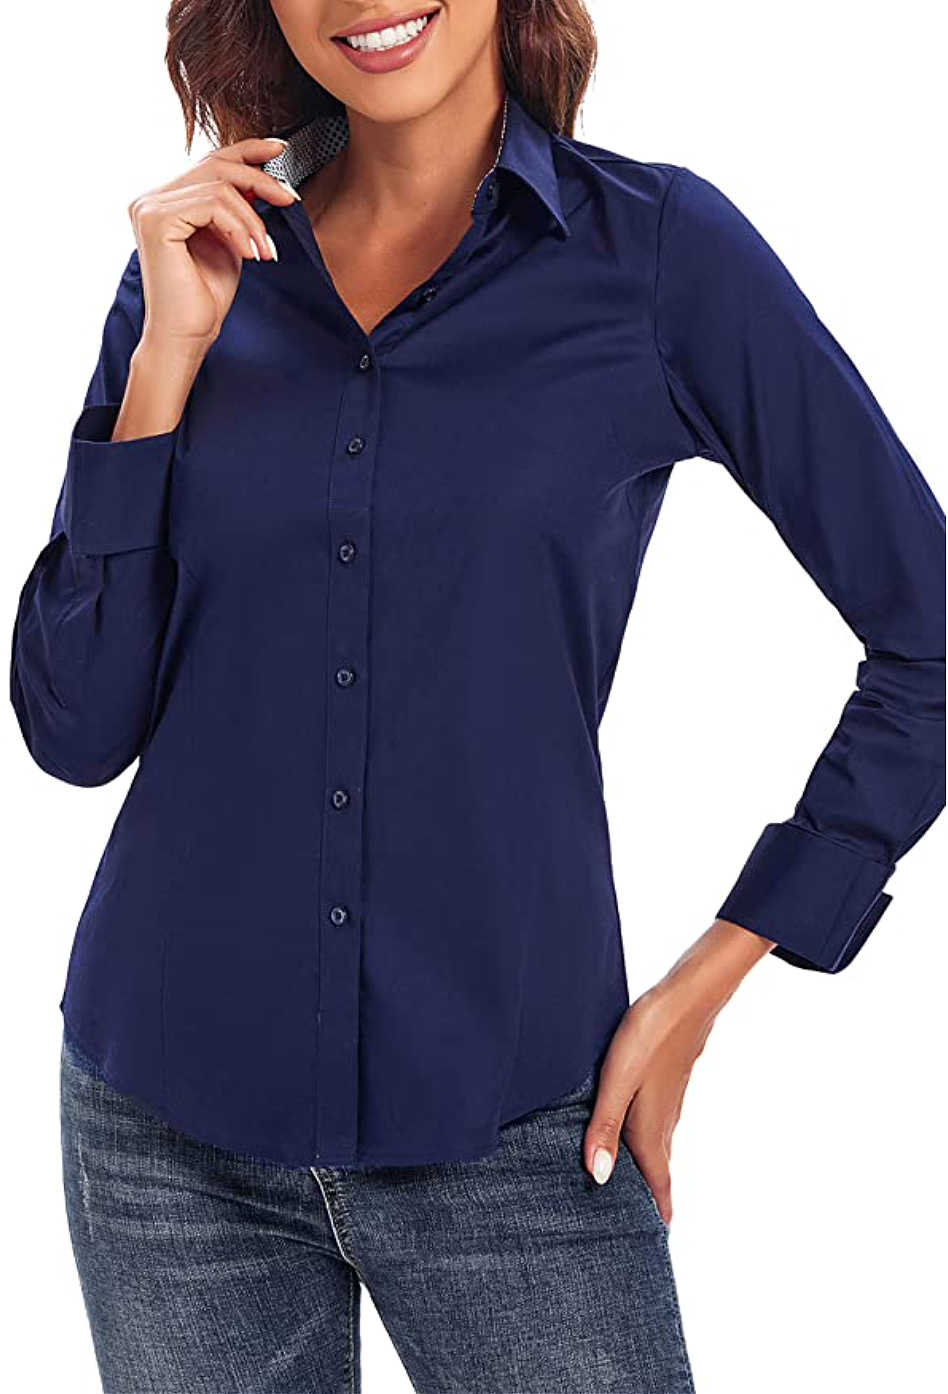 exposure passionate Umeki 11 Best Travel Shirts for Women Recommended by Readers